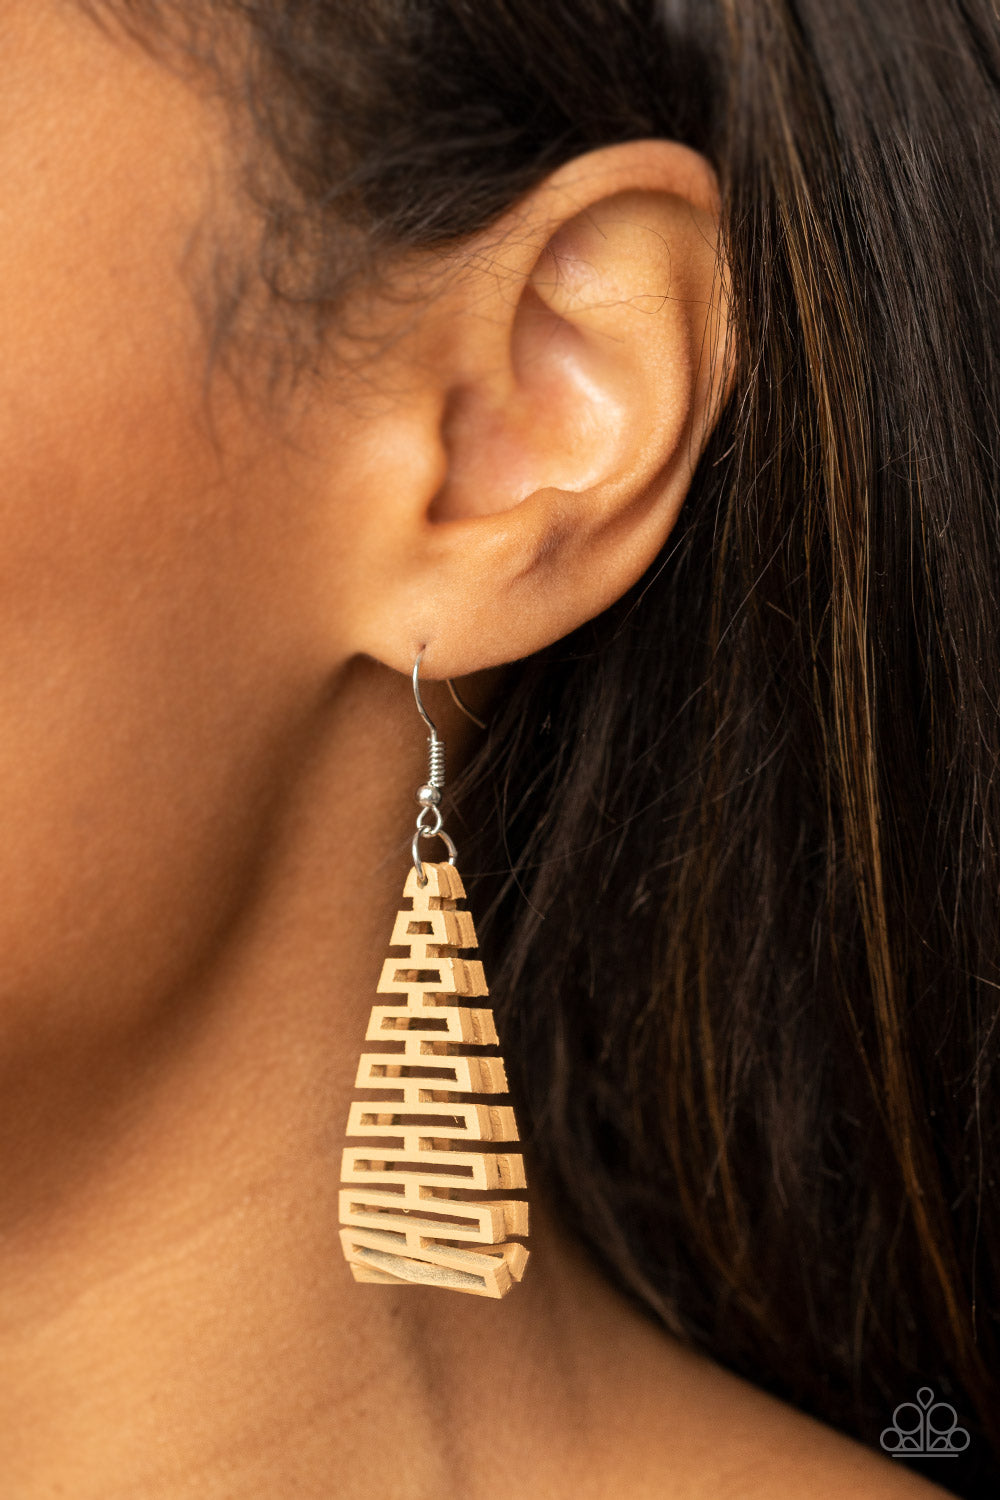 Urban Delirium Brown Leather Earring - Paparazzi Accessories  Featuring an edgy geometric cutout pattern, a stretchy piece of brown leather-like fabric delicately folds in half as it connects into a trendy frame. Earring attaches to a standard fishhook fitting.  Sold as one pair of earrings.